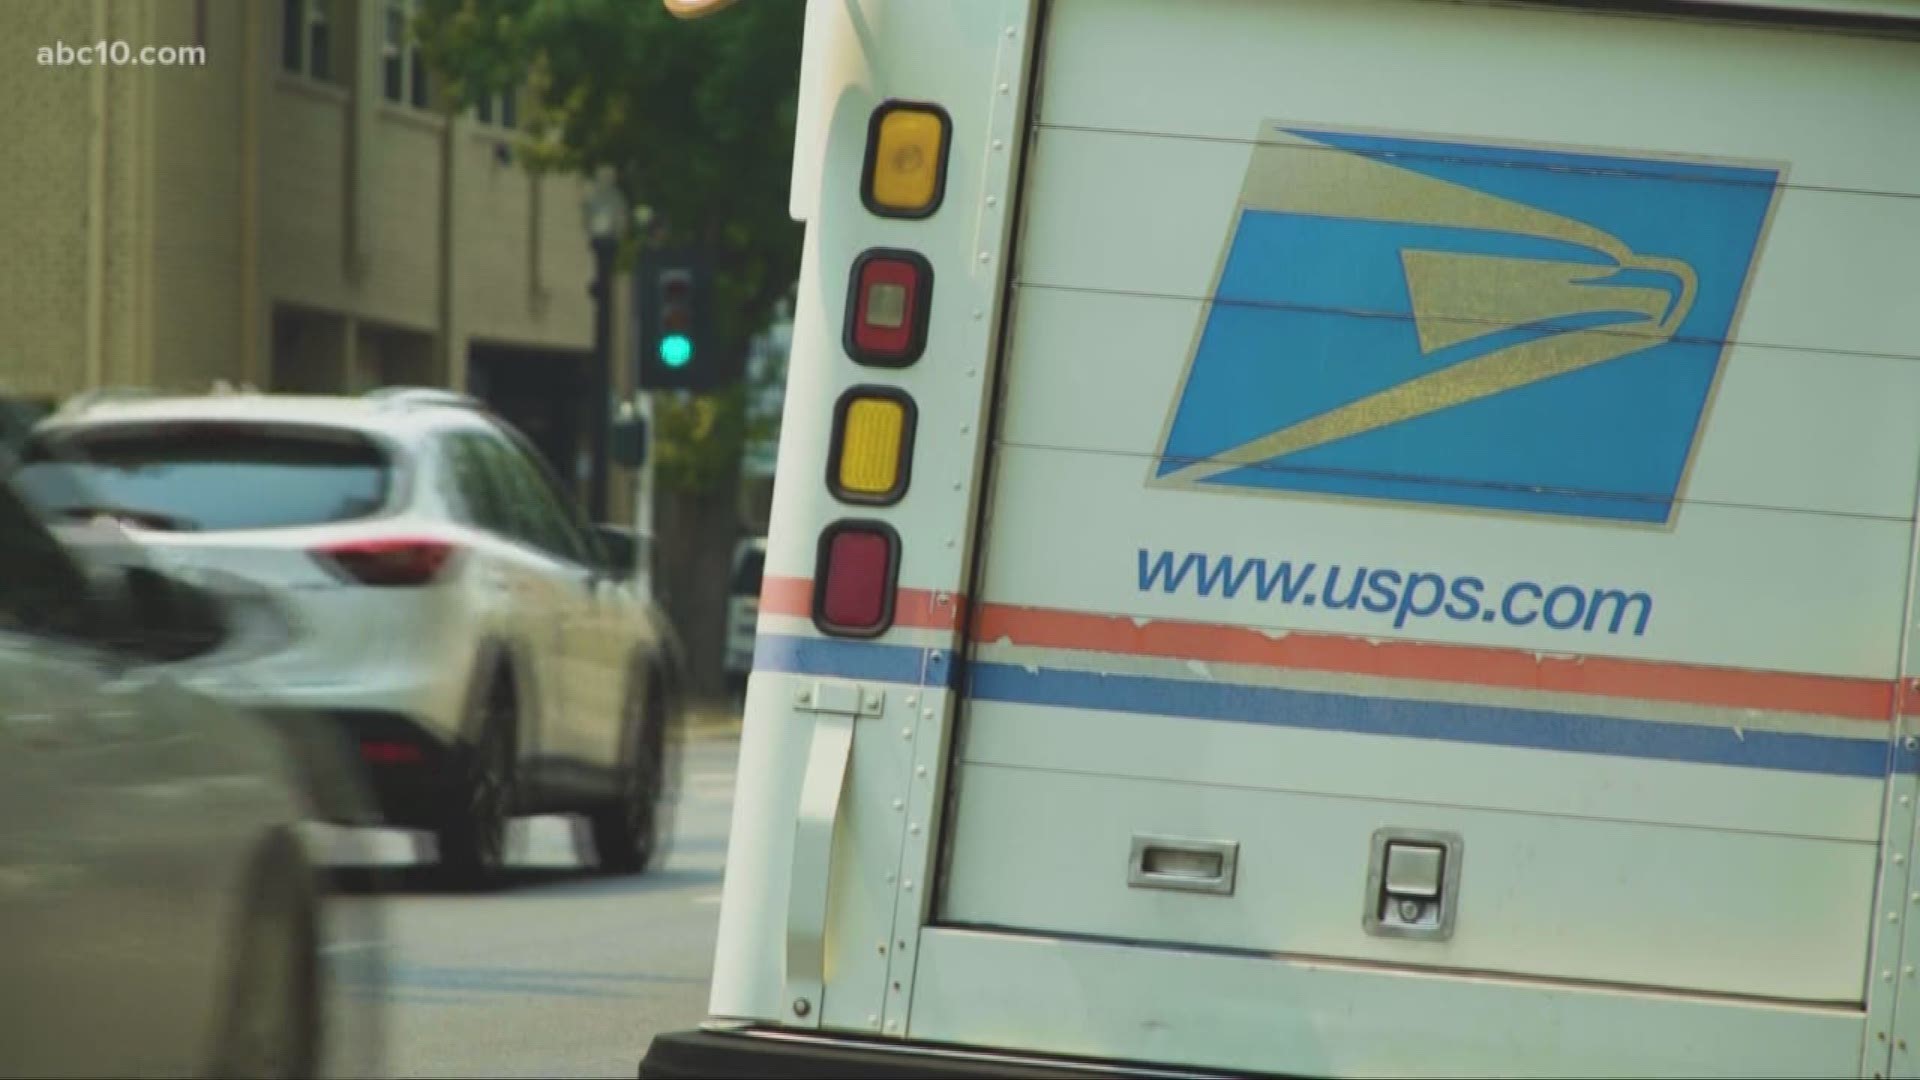 A health hazard is preventing the US Postal Service from delivering to Thorn Hill Drive in Rosemont.